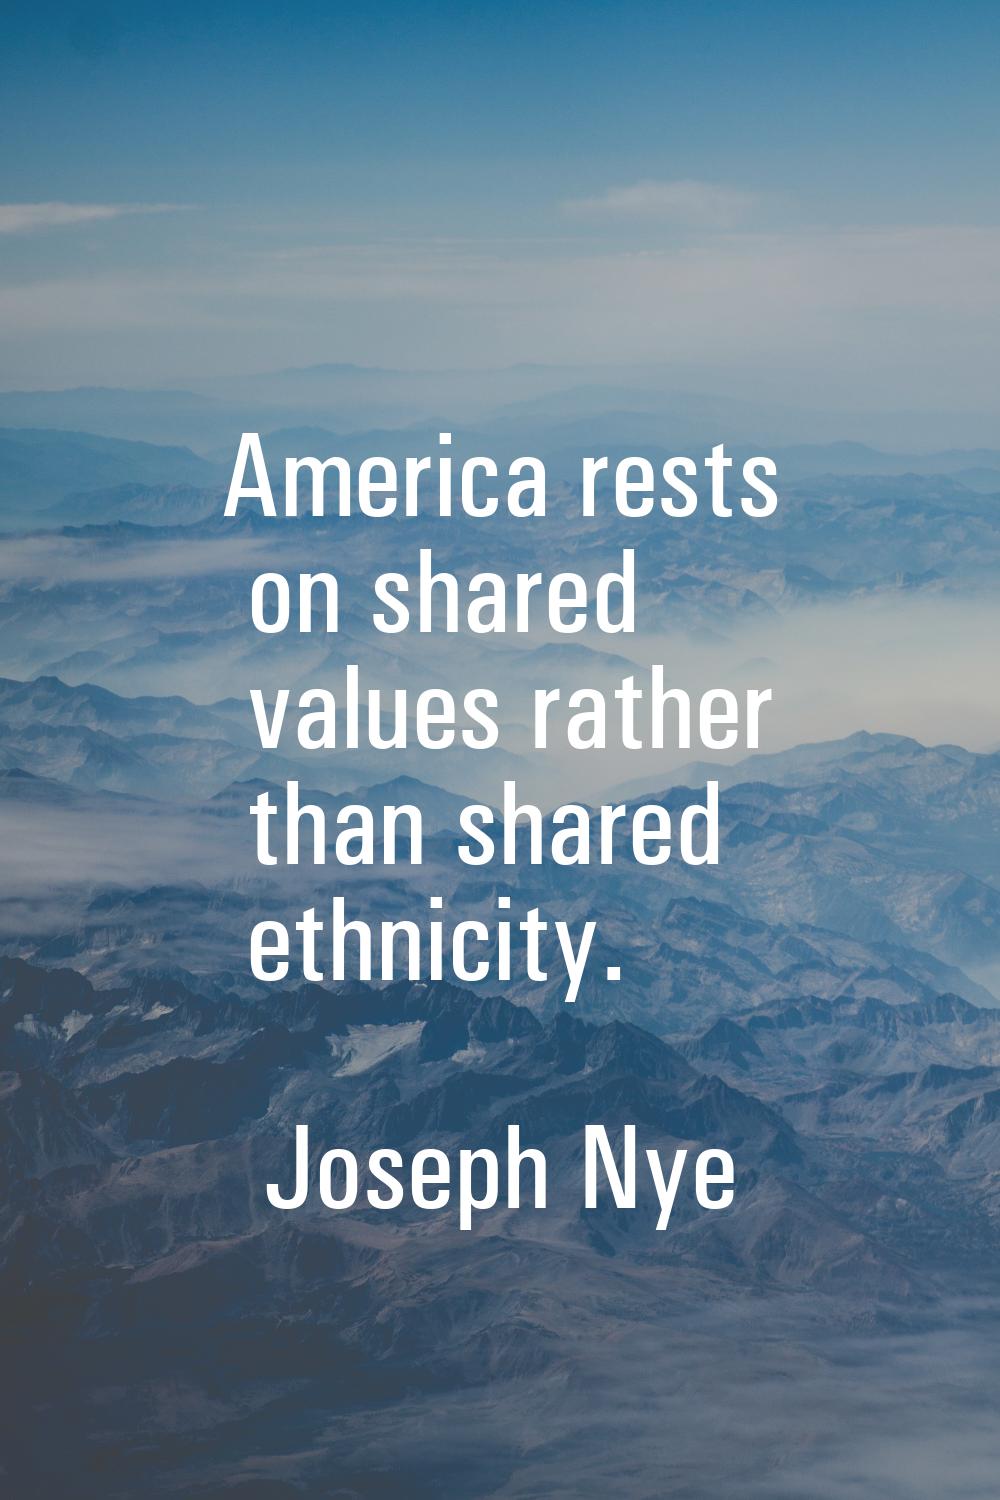 America rests on shared values rather than shared ethnicity.